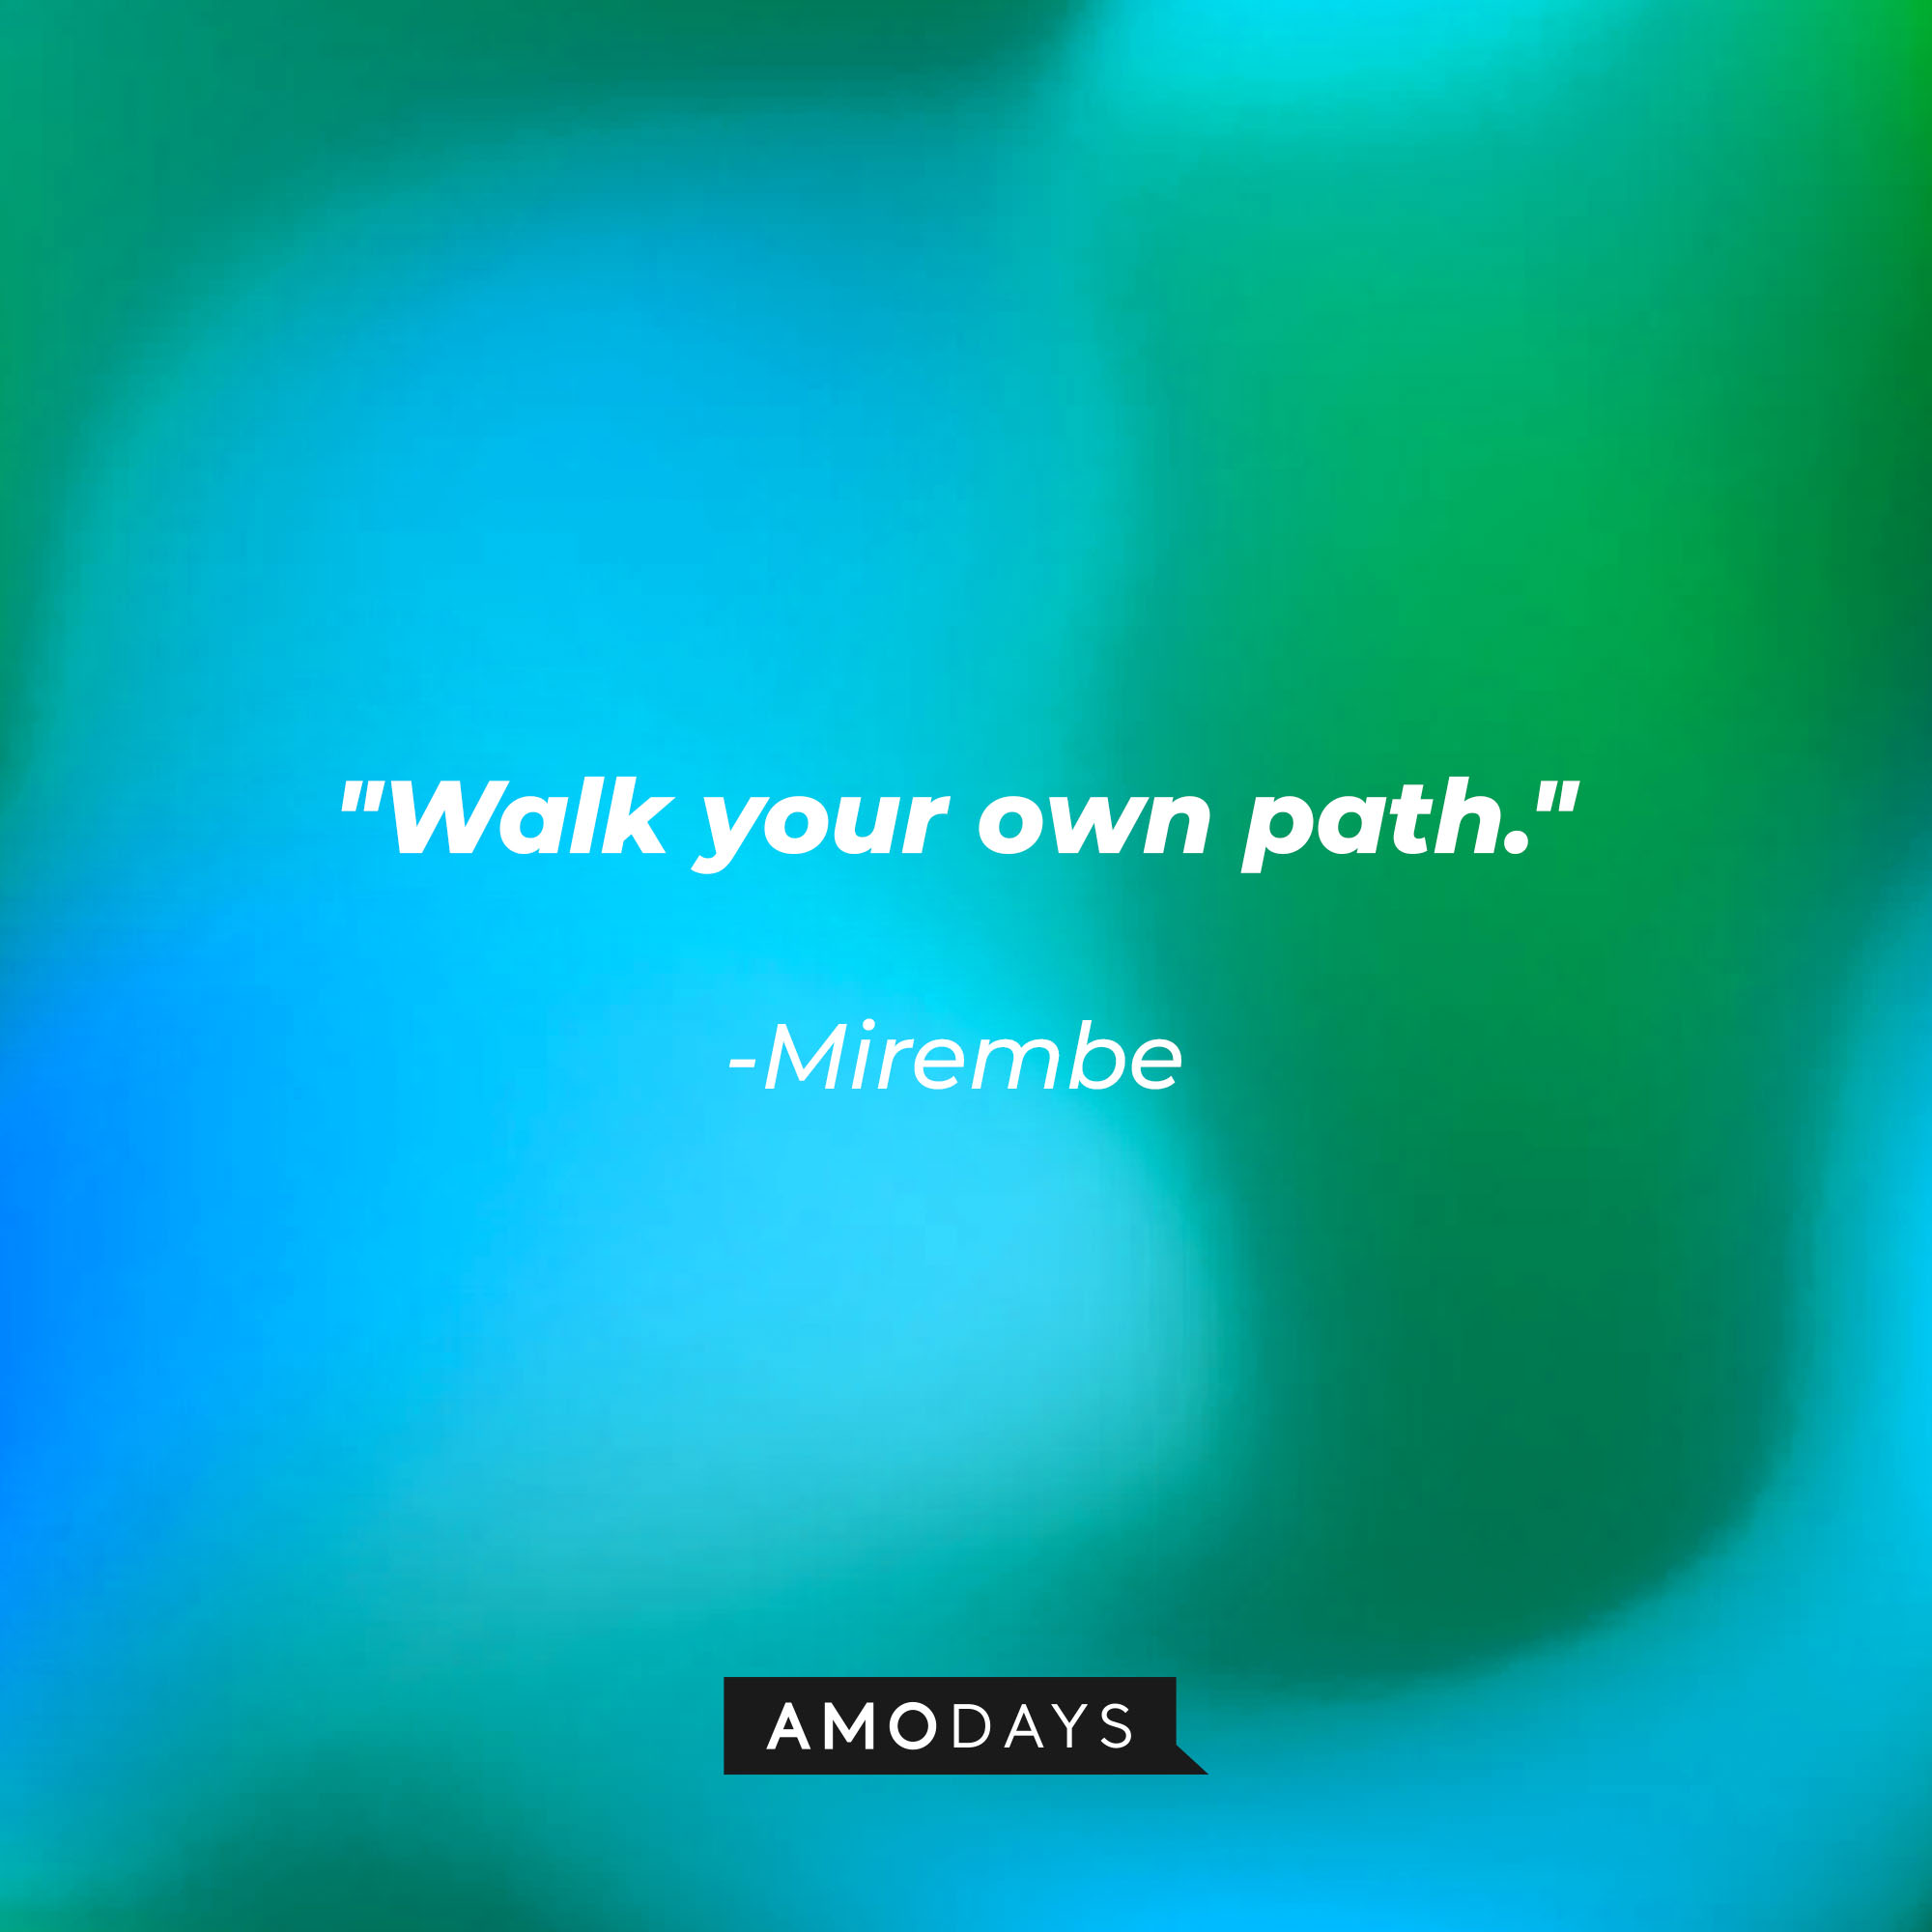 Mirembe’s quote: "Walk your own path." | Source: AmoDays